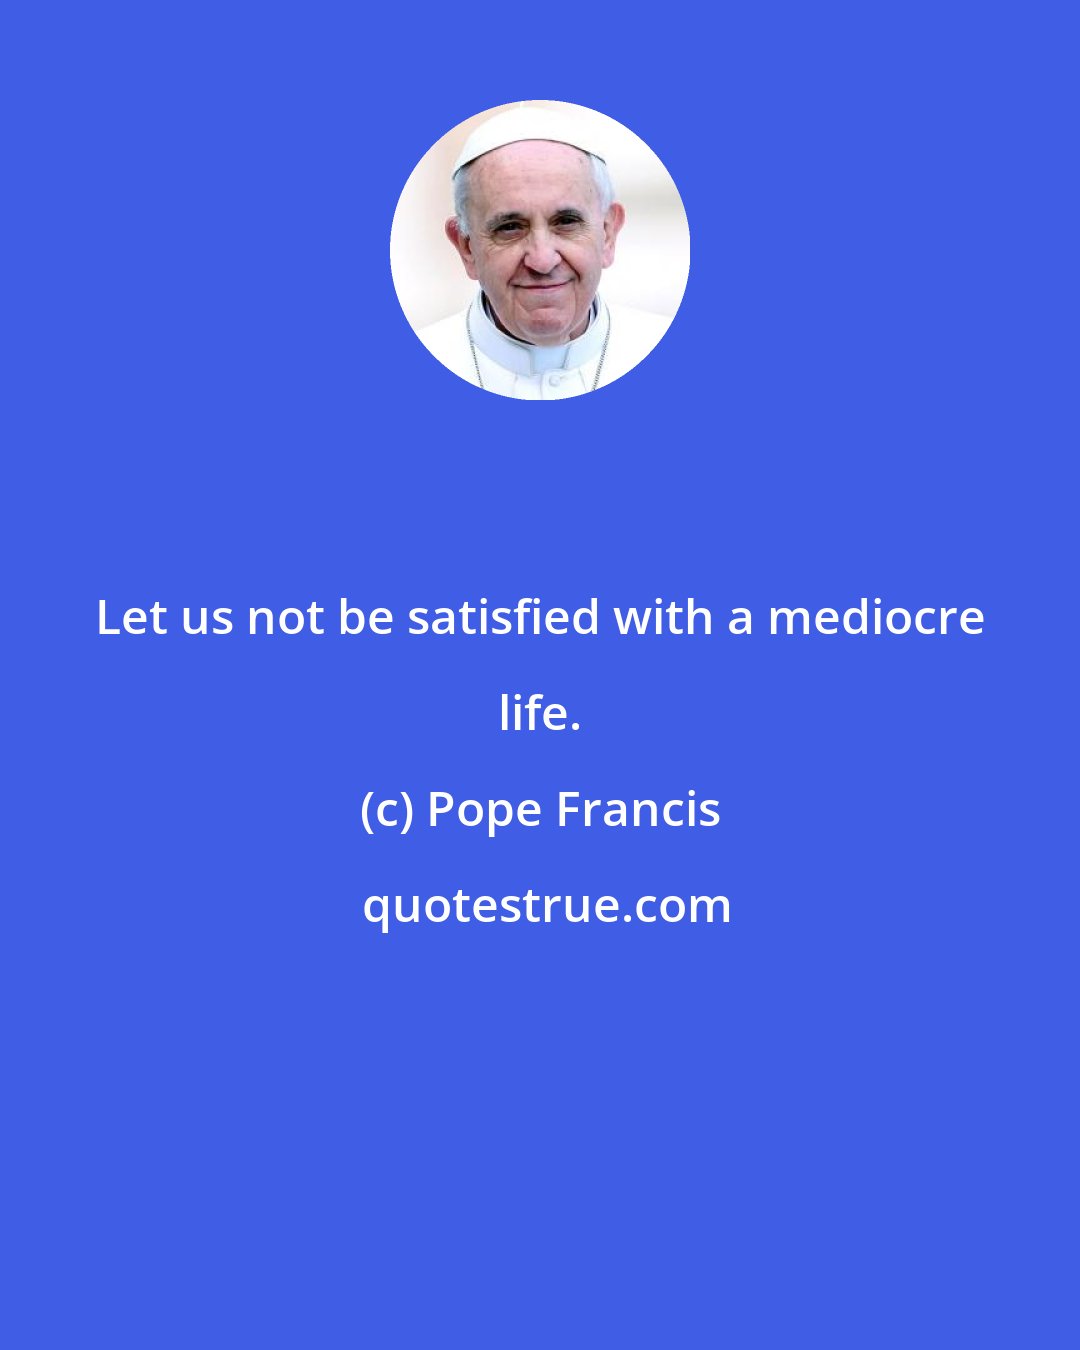 Pope Francis: Let us not be satisfied with a mediocre life.